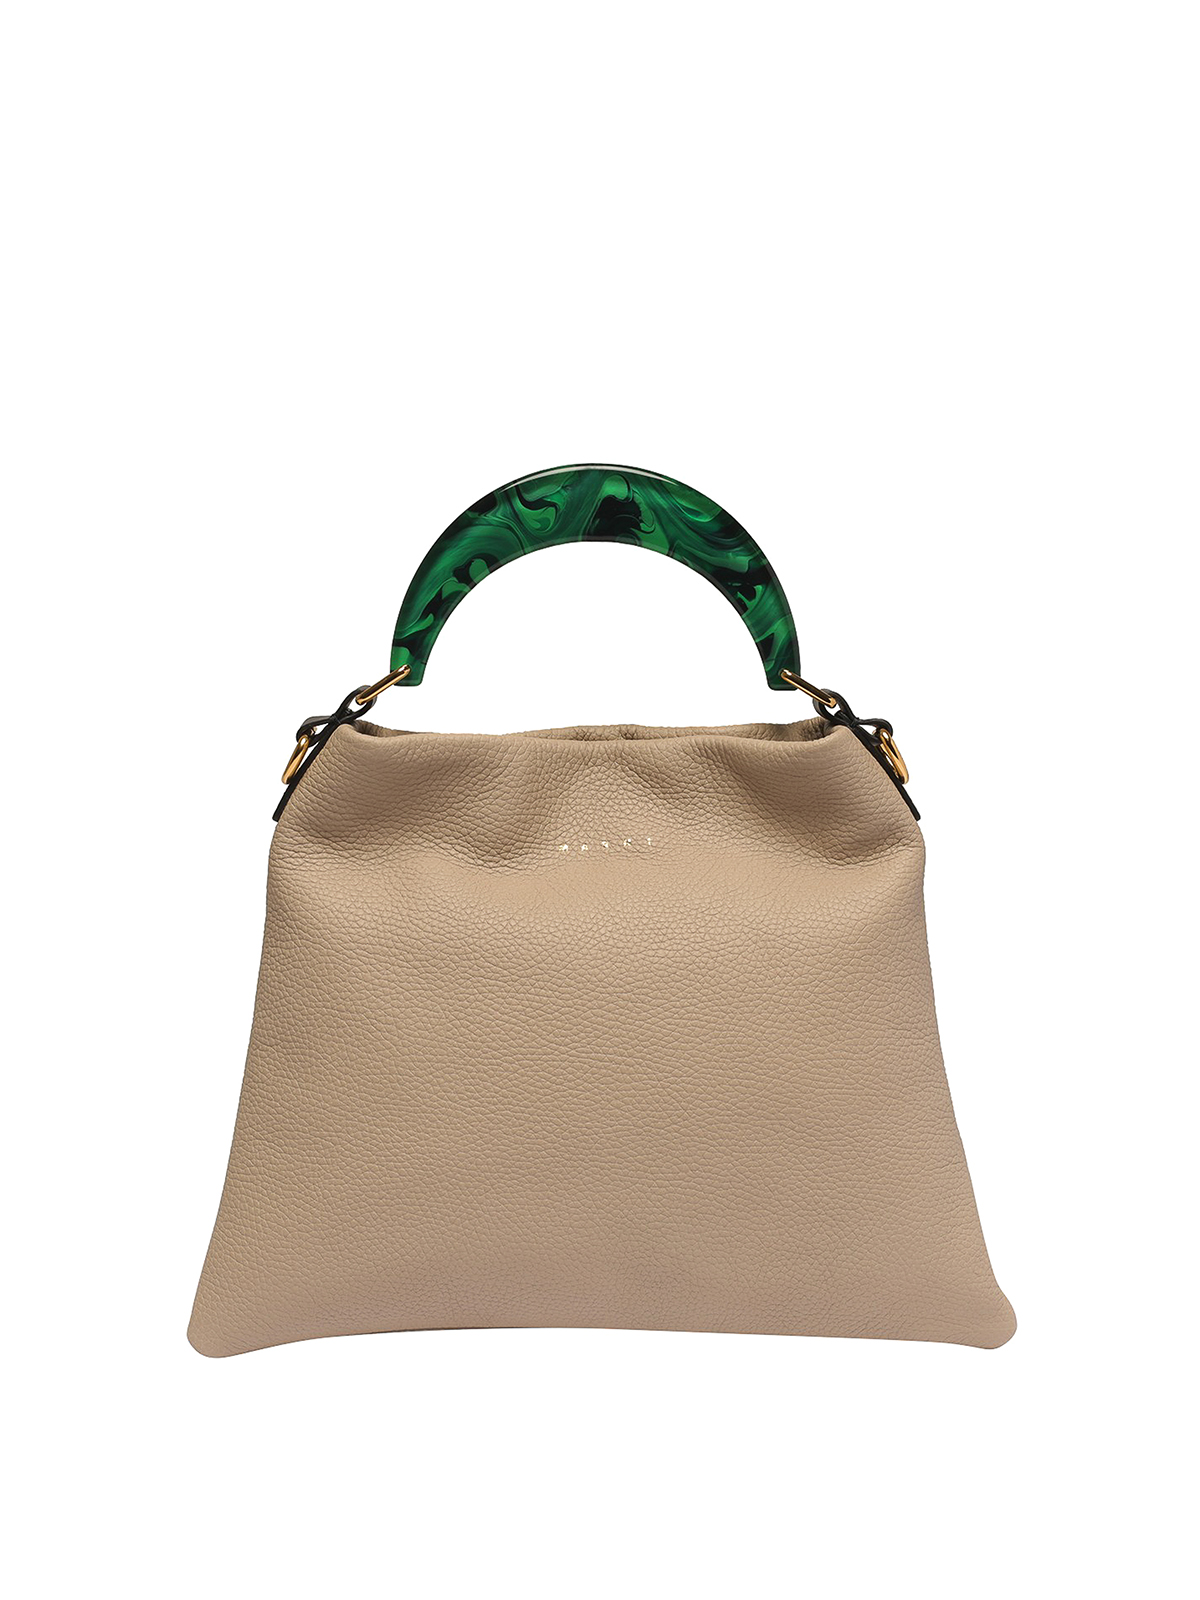 Marni Hammered Leather Bag With Detailed Handle In Beige